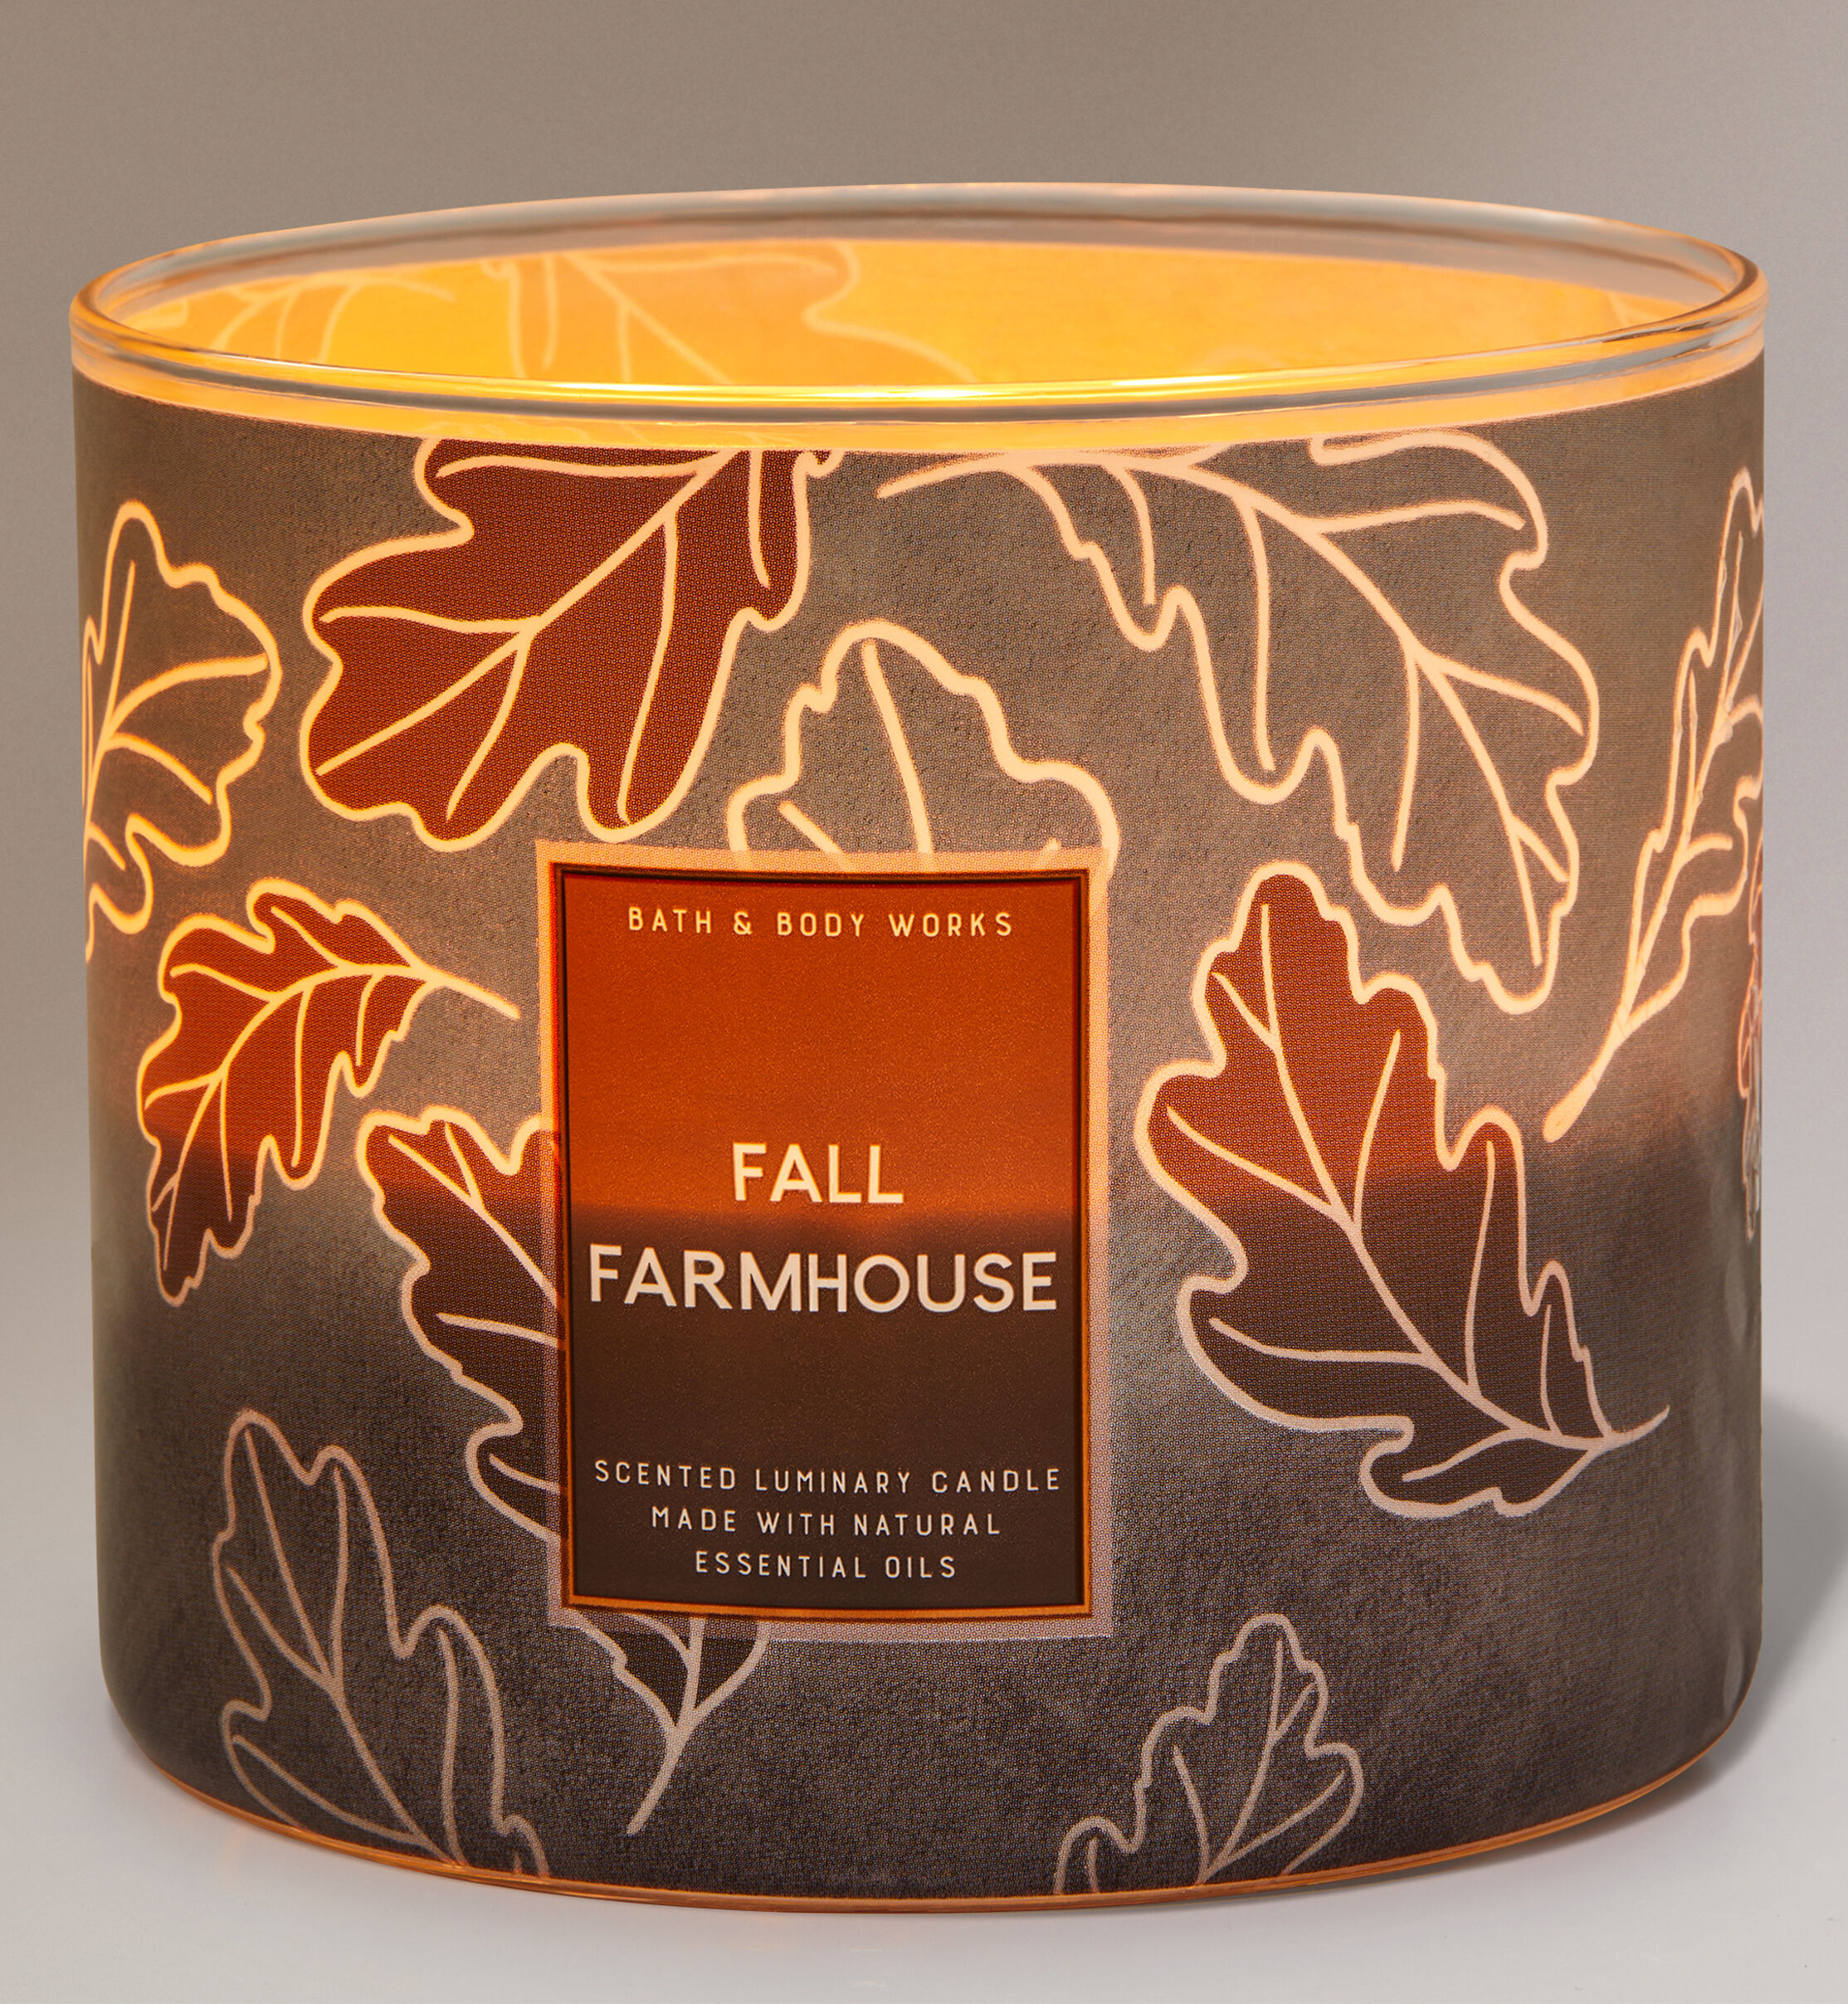 1 Bath & Body Works BLACKBERRY TEA LEAF Large 3-Wick Filled Candle FALL AUTUMN 